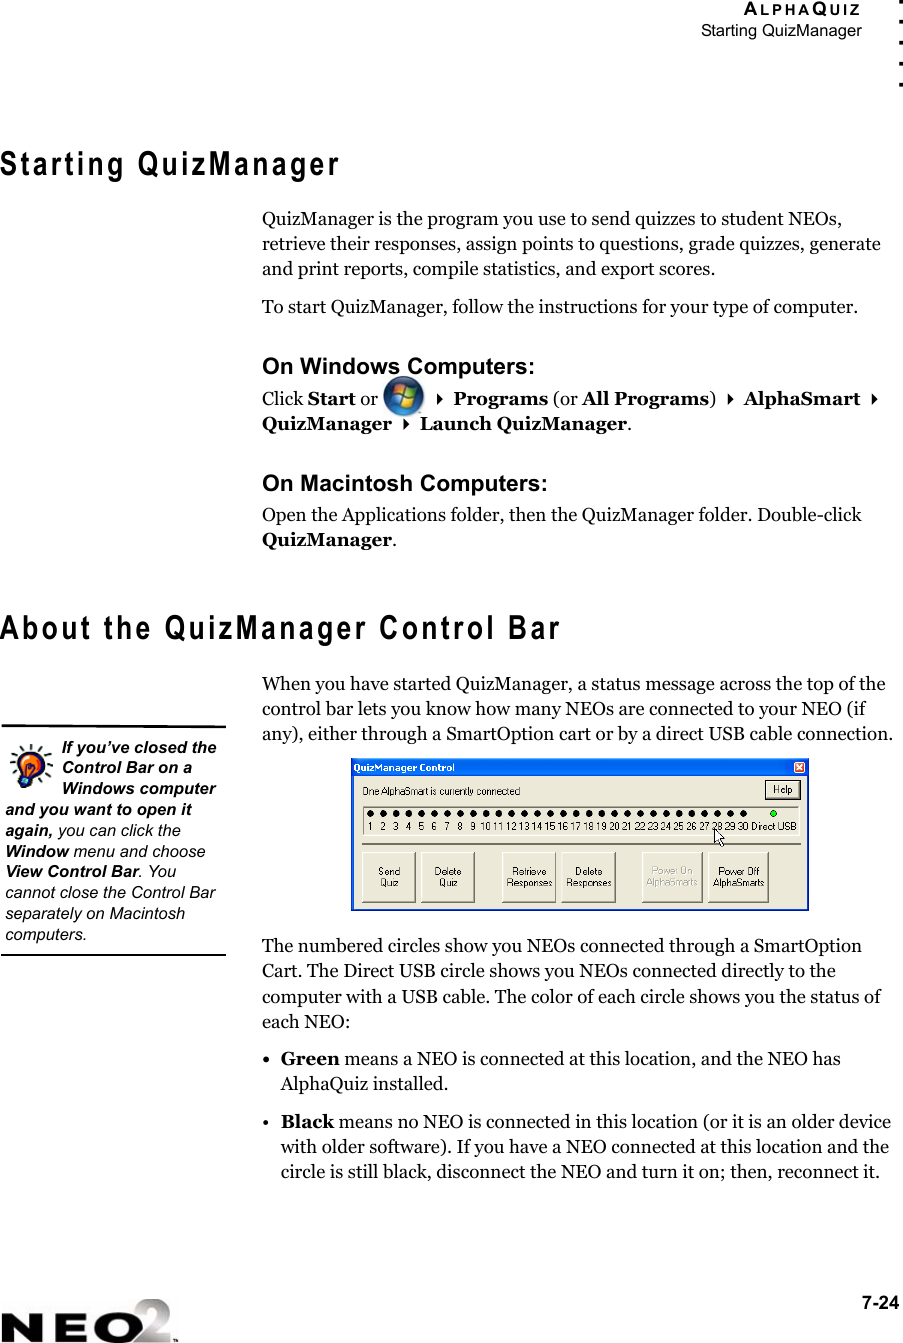 ALPHAQUIZStarting QuizManager7-24. . . . .Starting QuizManagerQuizManager is the program you use to send quizzes to student NEOs, retrieve their responses, assign points to questions, grade quizzes, generate and print reports, compile statistics, and export scores.To start QuizManager, follow the instructions for your type of computer.On Windows Computers:Click Start or    Programs (or All Programs)  AlphaSmart  QuizManager  Launch QuizManager.On Macintosh Computers:Open the Applications folder, then the QuizManager folder. Double-click QuizManager.About the QuizManager Control BarWhen you have started QuizManager, a status message across the top of the control bar lets you know how many NEOs are connected to your NEO (if any), either through a SmartOption cart or by a direct USB cable connection.The numbered circles show you NEOs connected through a SmartOption Cart. The Direct USB circle shows you NEOs connected directly to the computer with a USB cable. The color of each circle shows you the status of each NEO:•Green means a NEO is connected at this location, and the NEO has AlphaQuiz installed.•Black means no NEO is connected in this location (or it is an older device with older software). If you have a NEO connected at this location and the circle is still black, disconnect the NEO and turn it on; then, reconnect it.If you’ve closed the Control Bar on a Windows computer and you want to open it again, you can click the Window menu and choose View Control Bar. You cannot close the Control Bar separately on Macintosh computers.